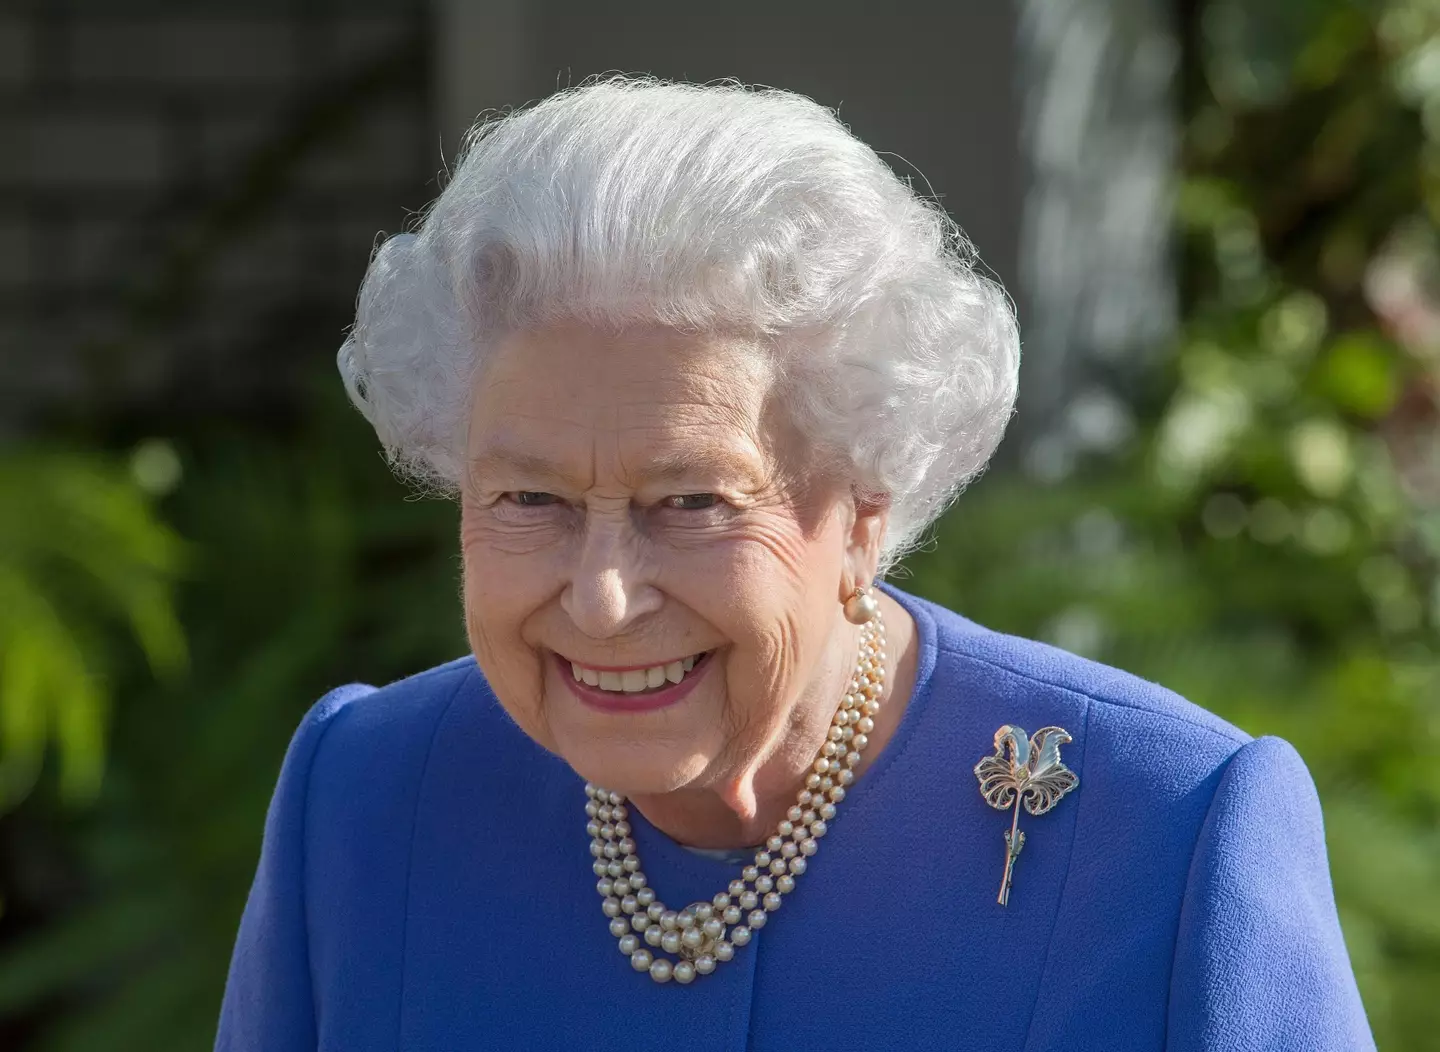 The Queen is celebrating her platinum jubilee this year. (